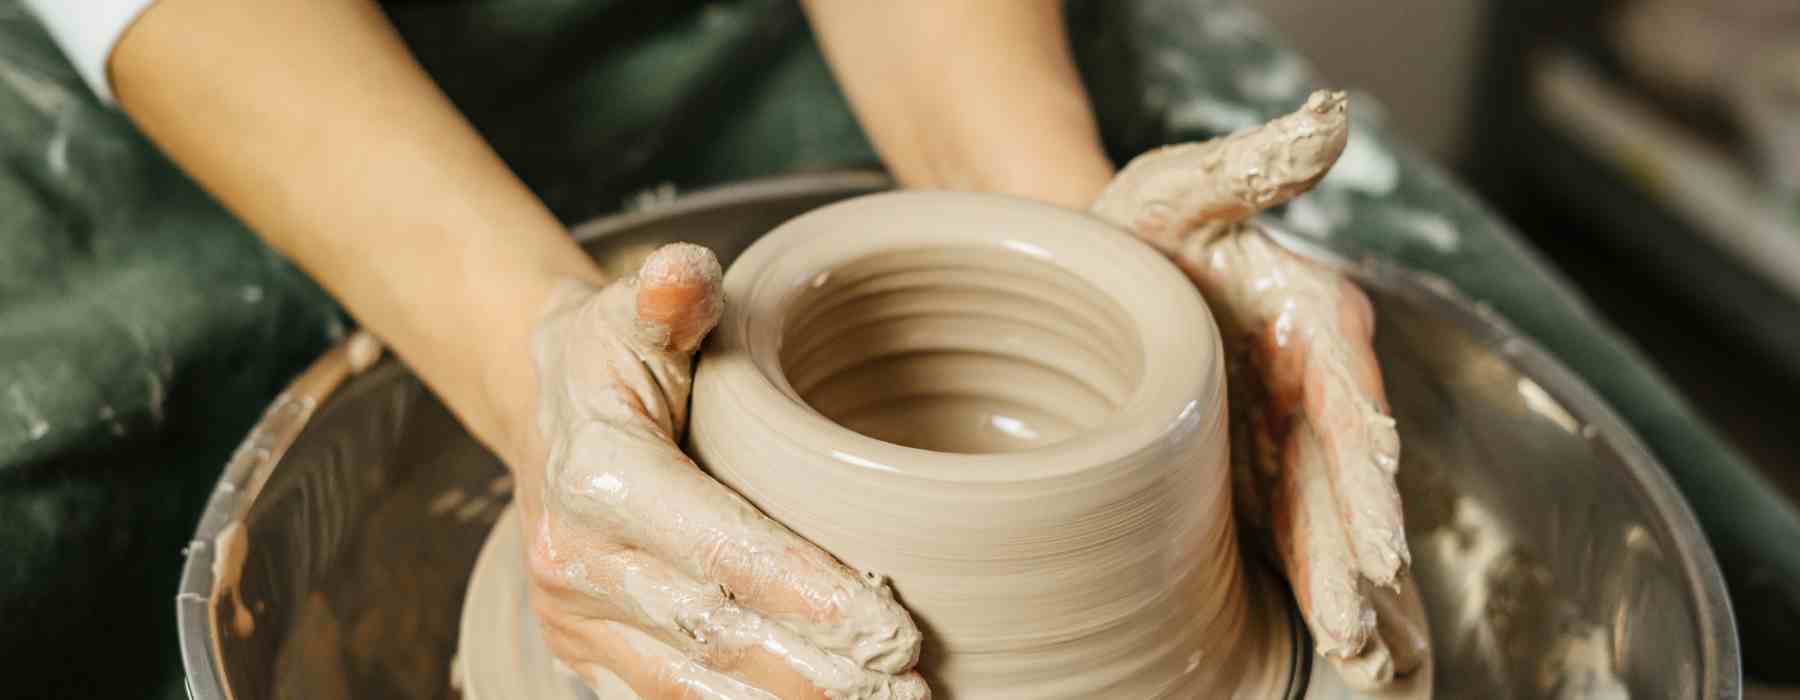 How to Center Clay on a Potter's Wheel